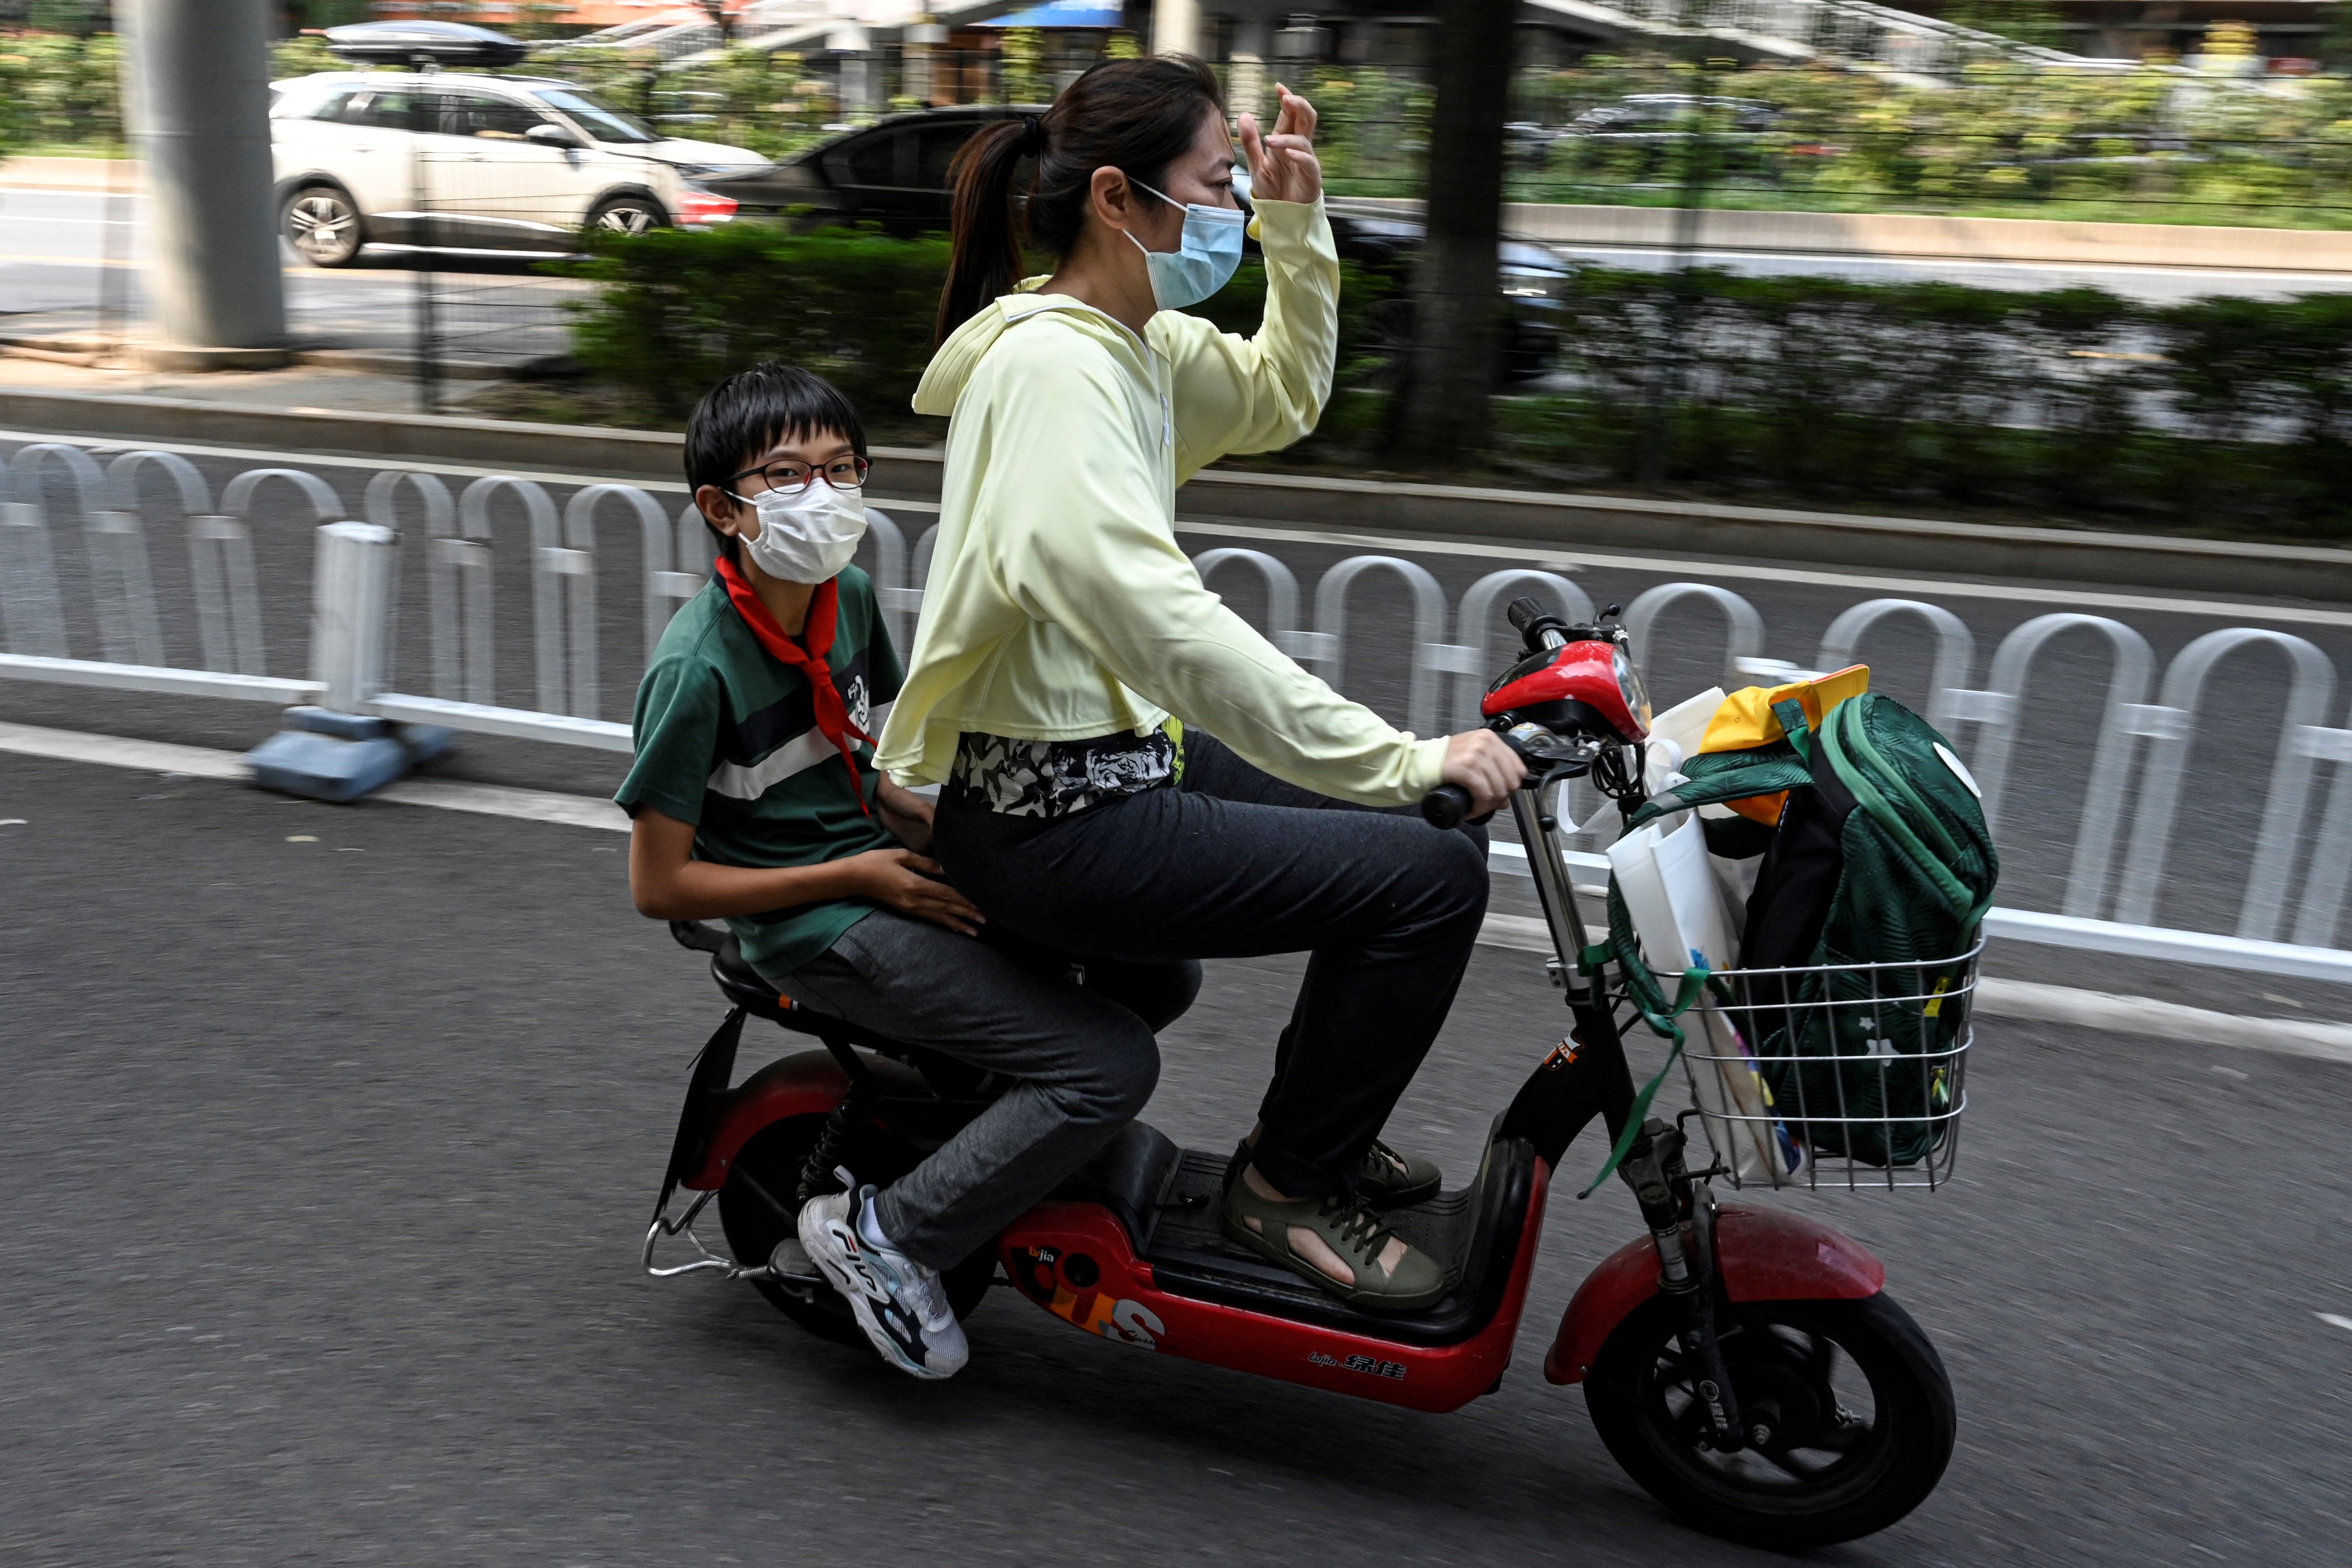 File: A student leaves on a scooter following the end of the day’s school session in Beijing on 10 September 2021